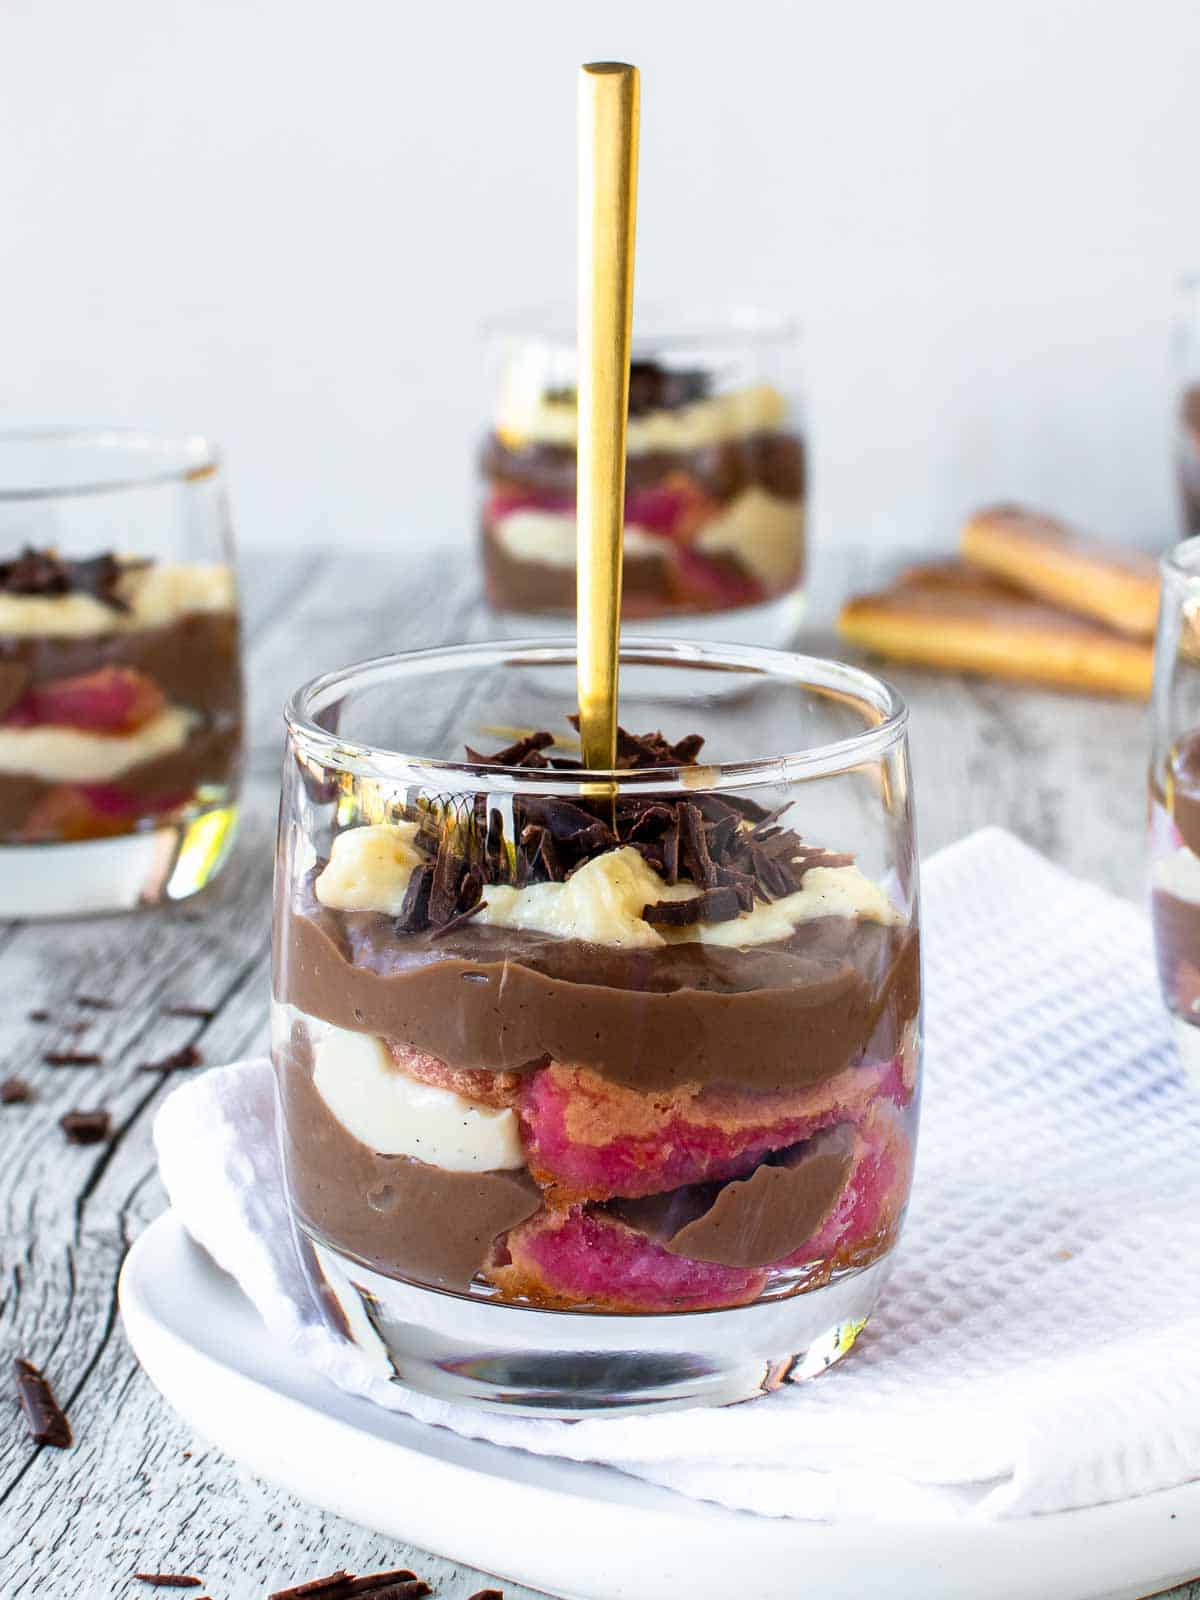 Zuppa Inglese in a glass with a gold spoon standing upright in the dessert.